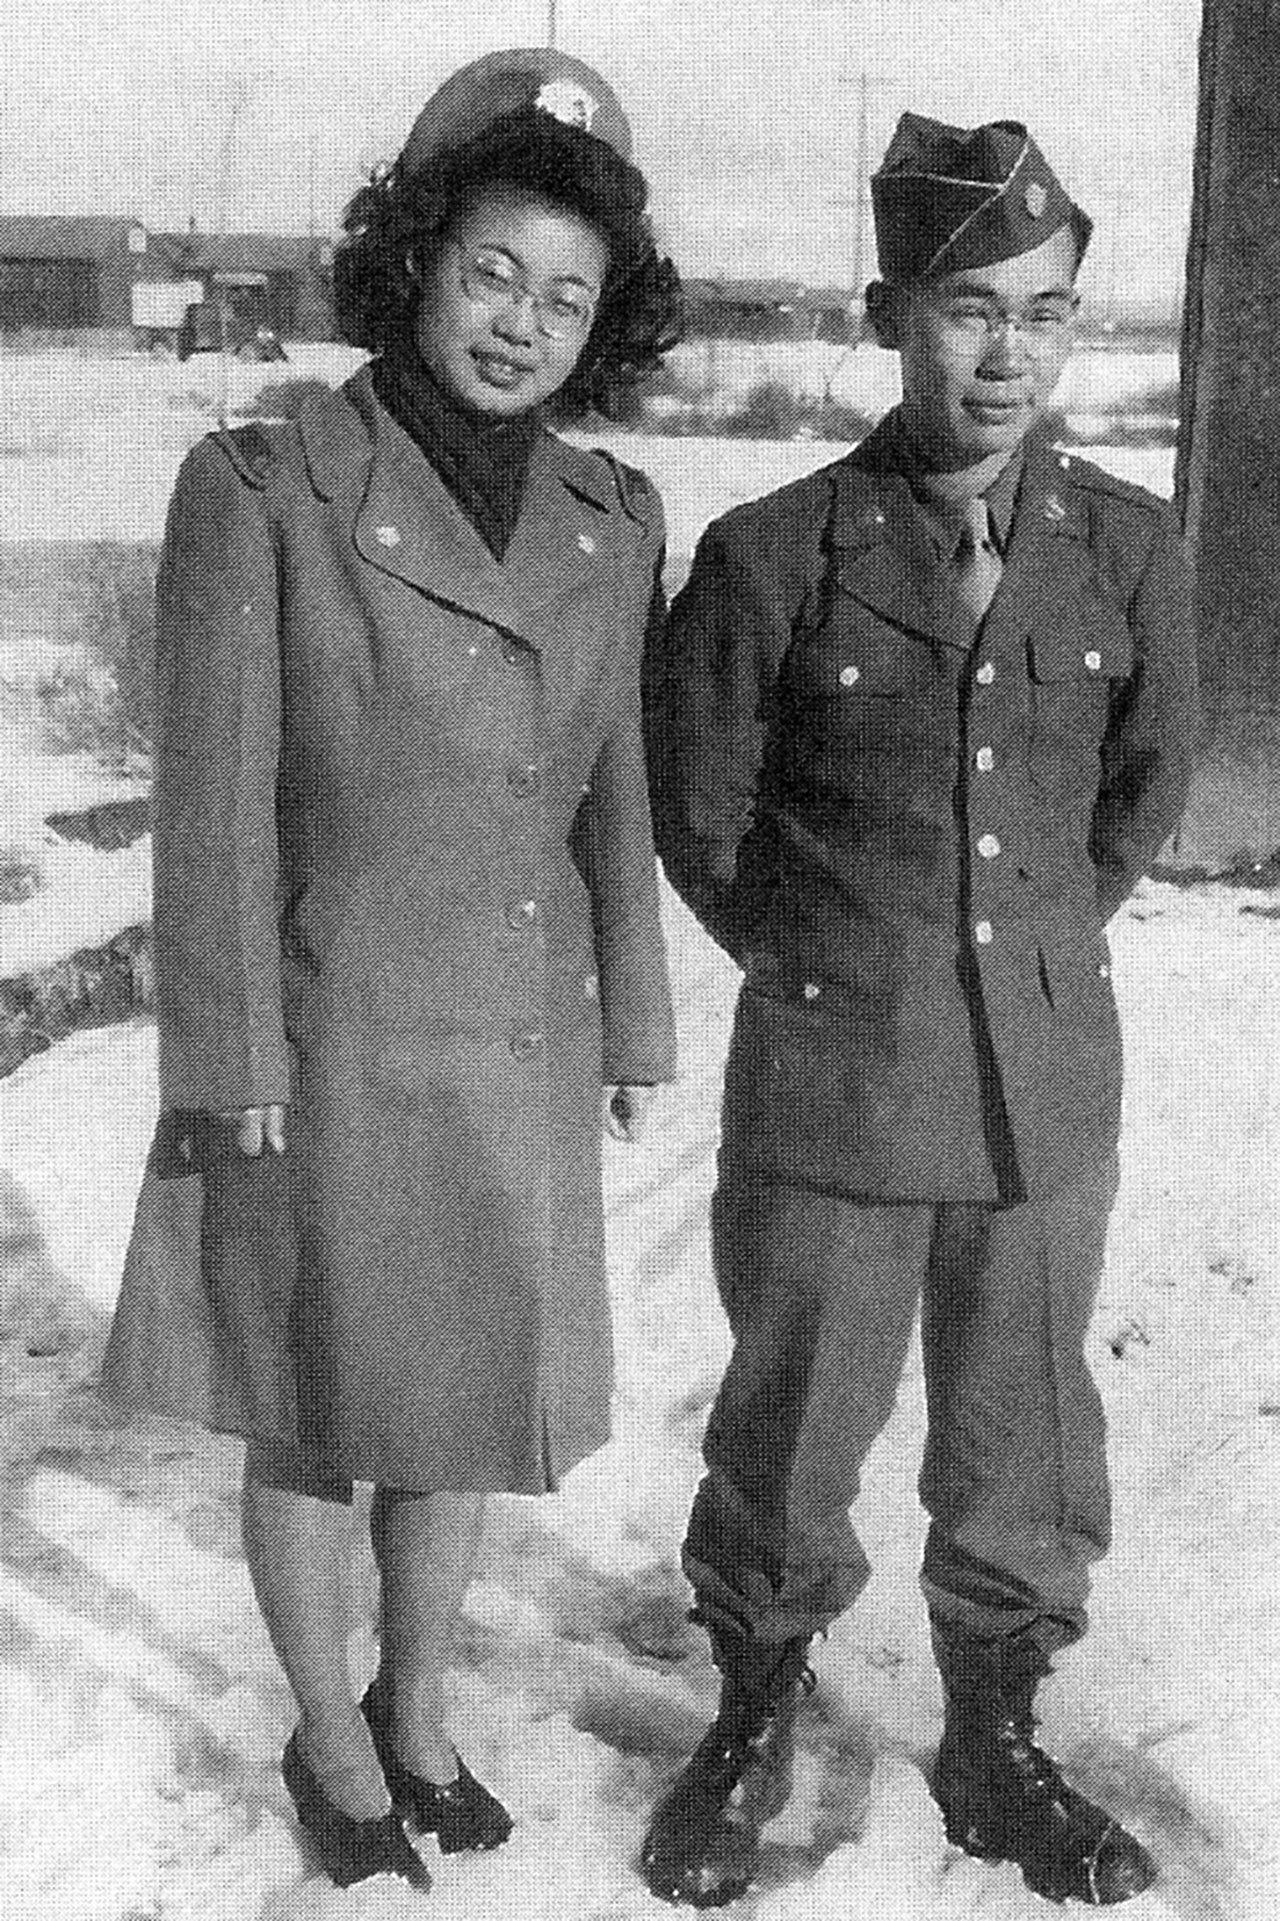 Mary and Yoneichi Matsuda were evacuated with their parents from Vashon and imprisoned as a result of Executive Order 9066. (Matsuda Family photo)